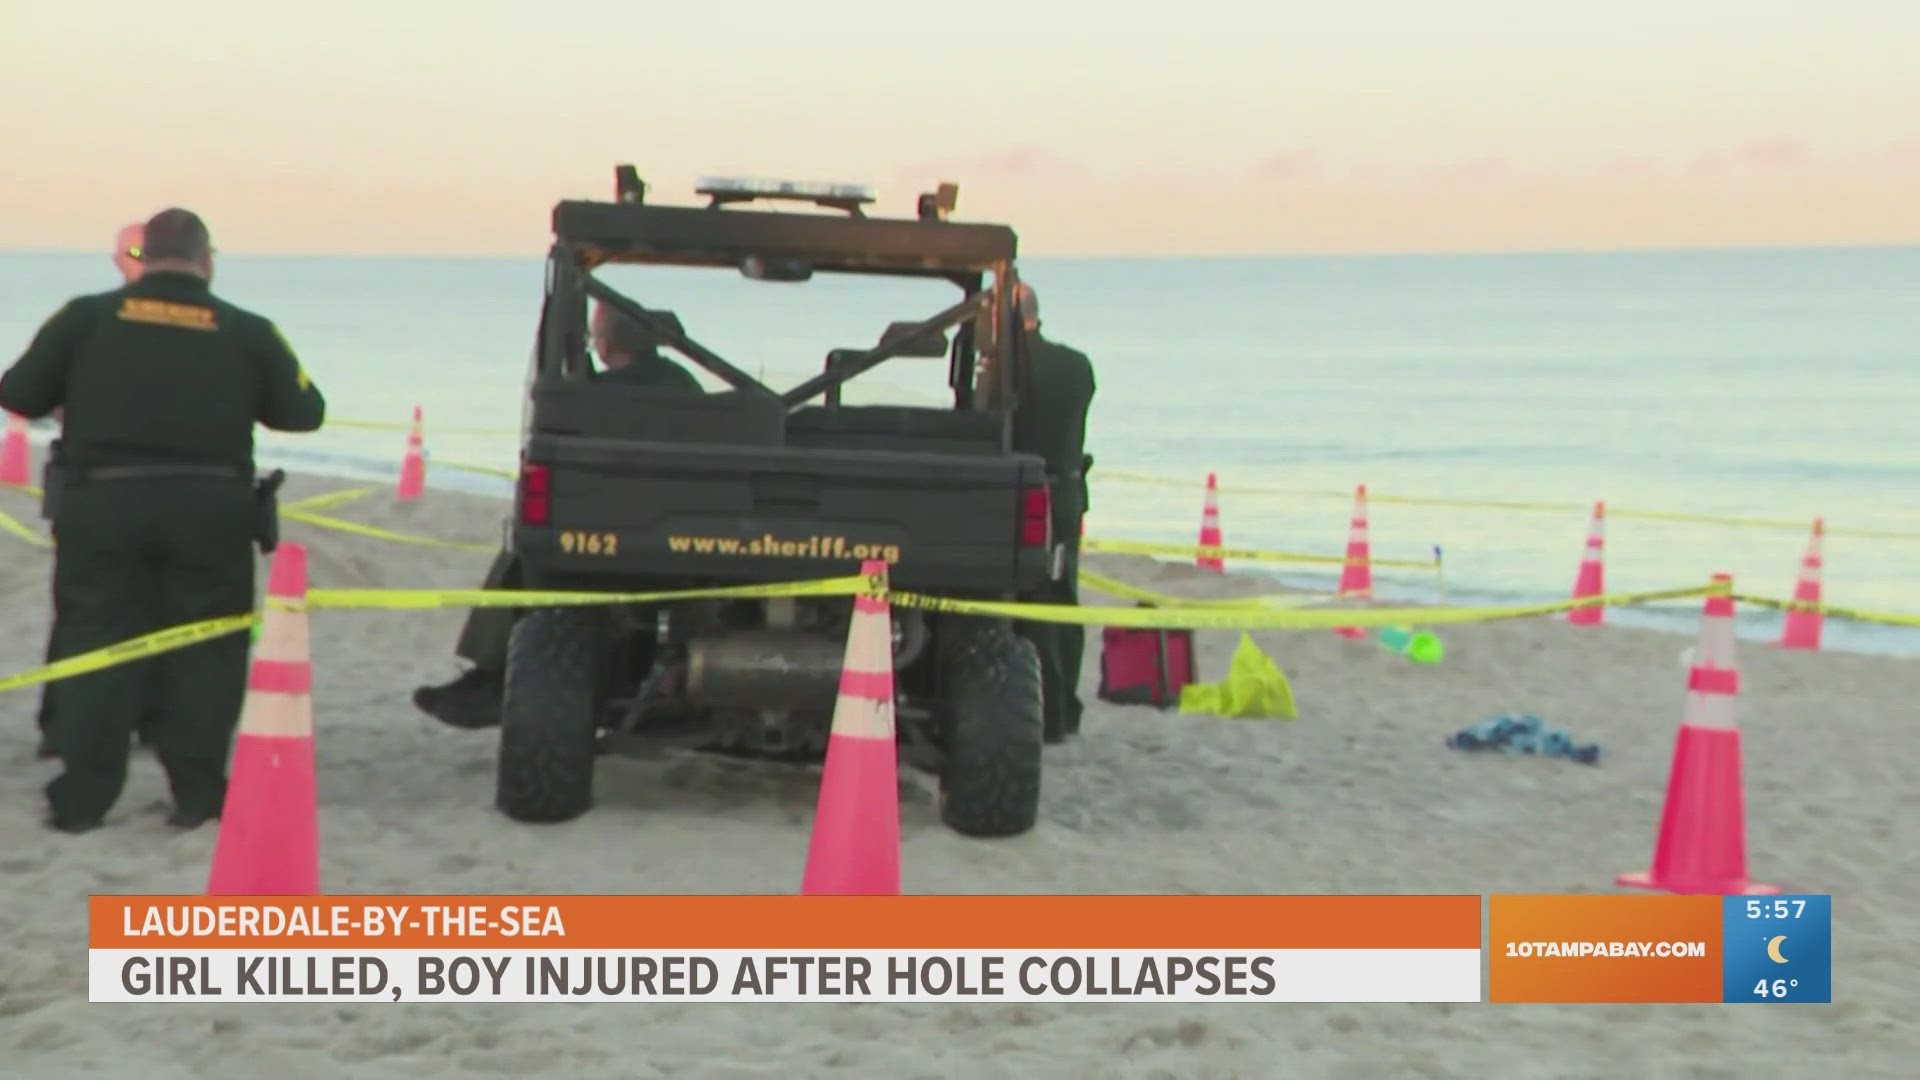 The girl, about 7 years old, was completely buried in the sand underneath the boy, authorities told local news outlets.